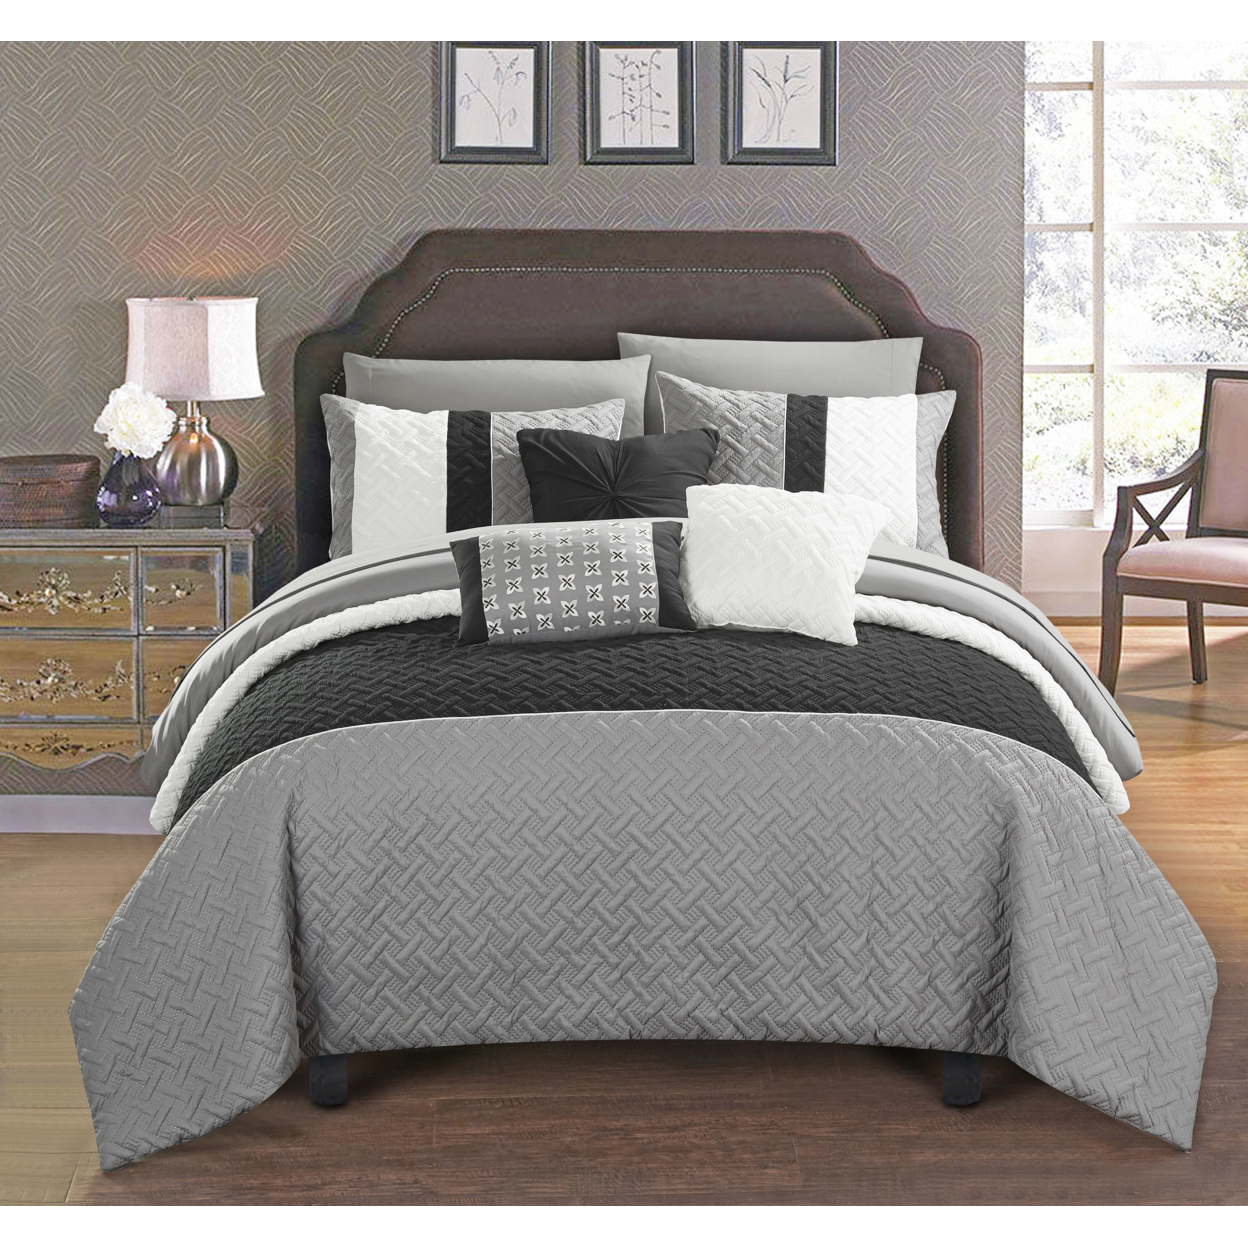 Chic Home Shaila 10 Or 8 Piece Comforter Set Color Block Quilted Embroidered Design Bed In A Bag Bedding - Grey, King